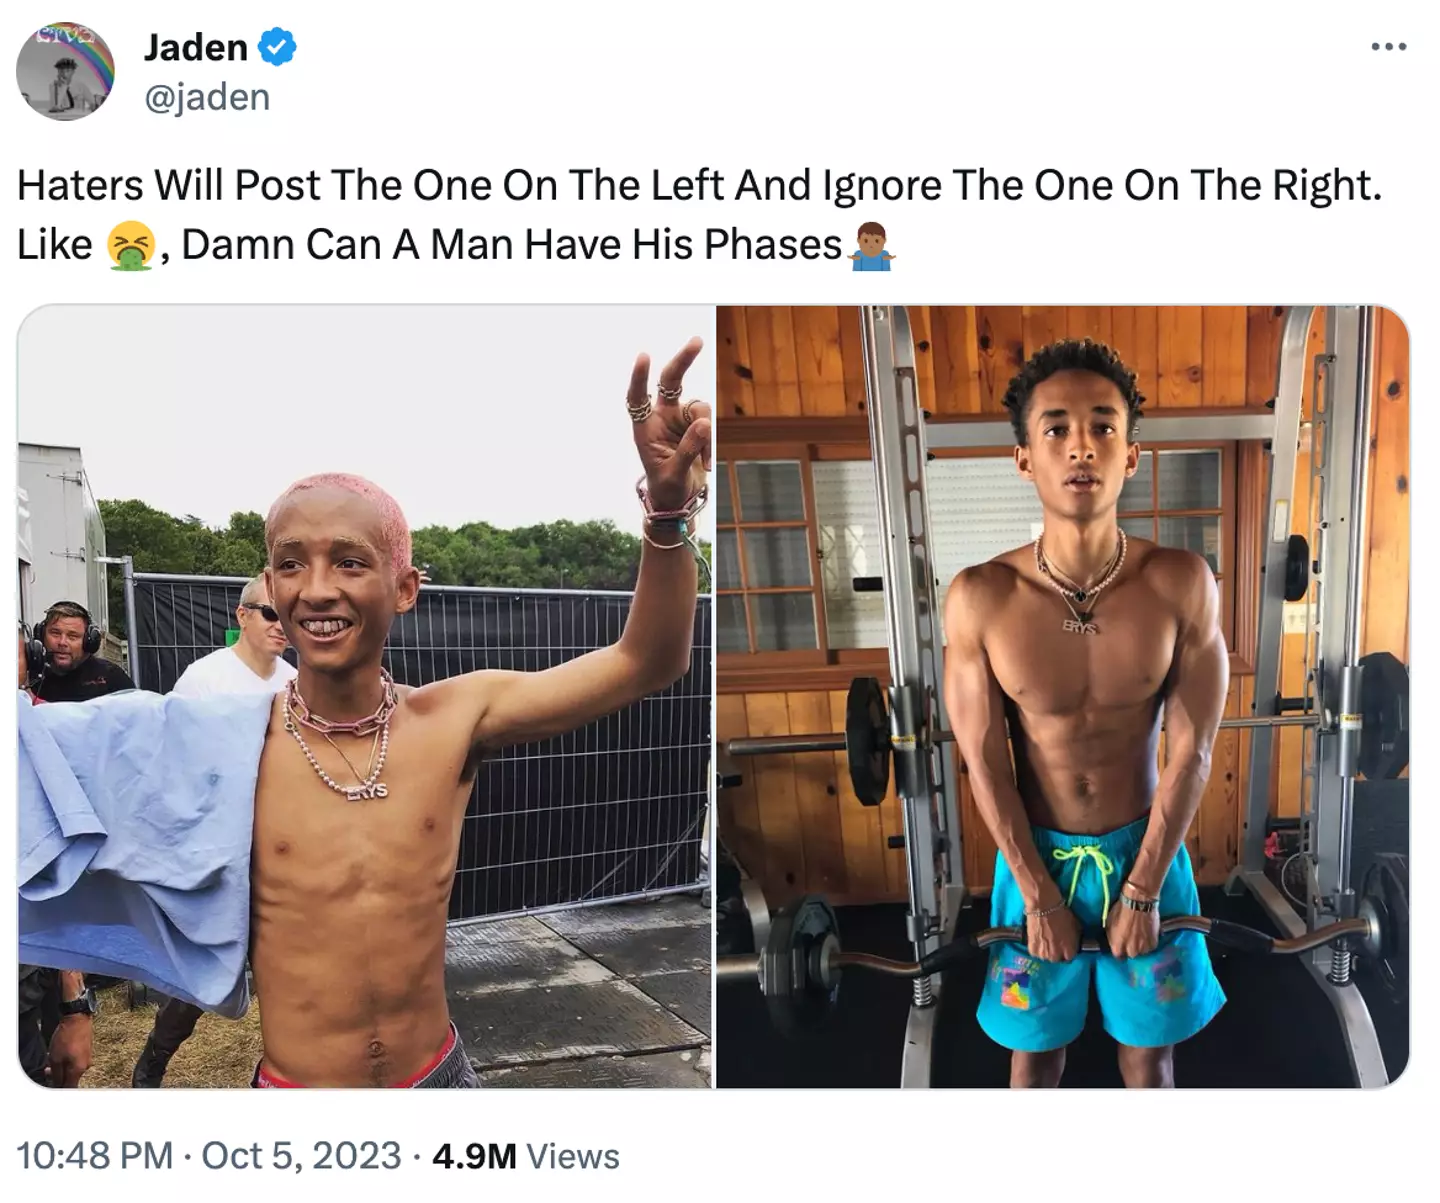 Jaden Smith called out the 'haters' sharing old photos.